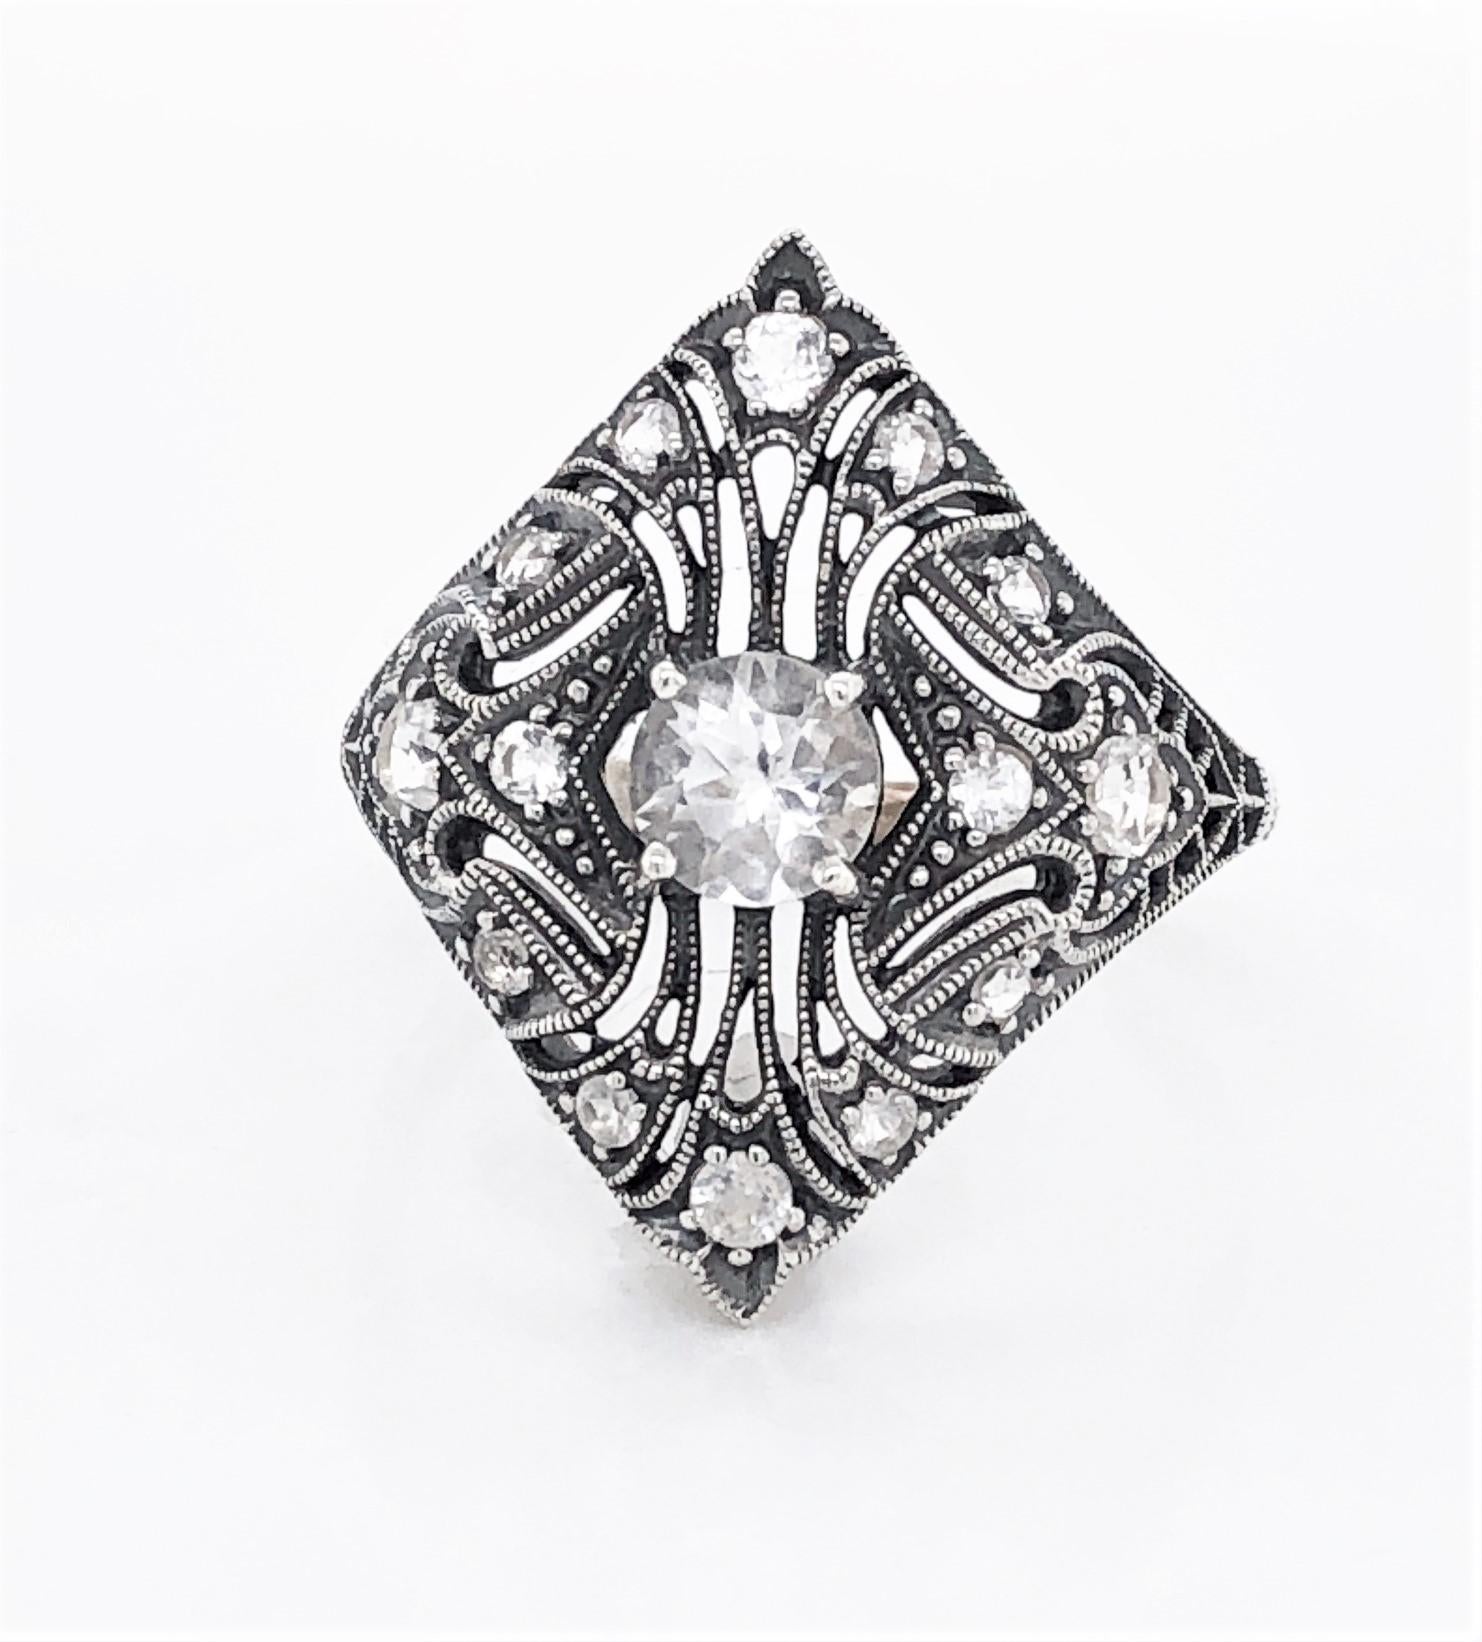 Love the shape of this Art Deco Style inspired design in sterling silver filigree with genuine gemstones. With exquisite detail reminiscent of the period, this ring has a featured  .20 carat round faceted white topaz with additional accents